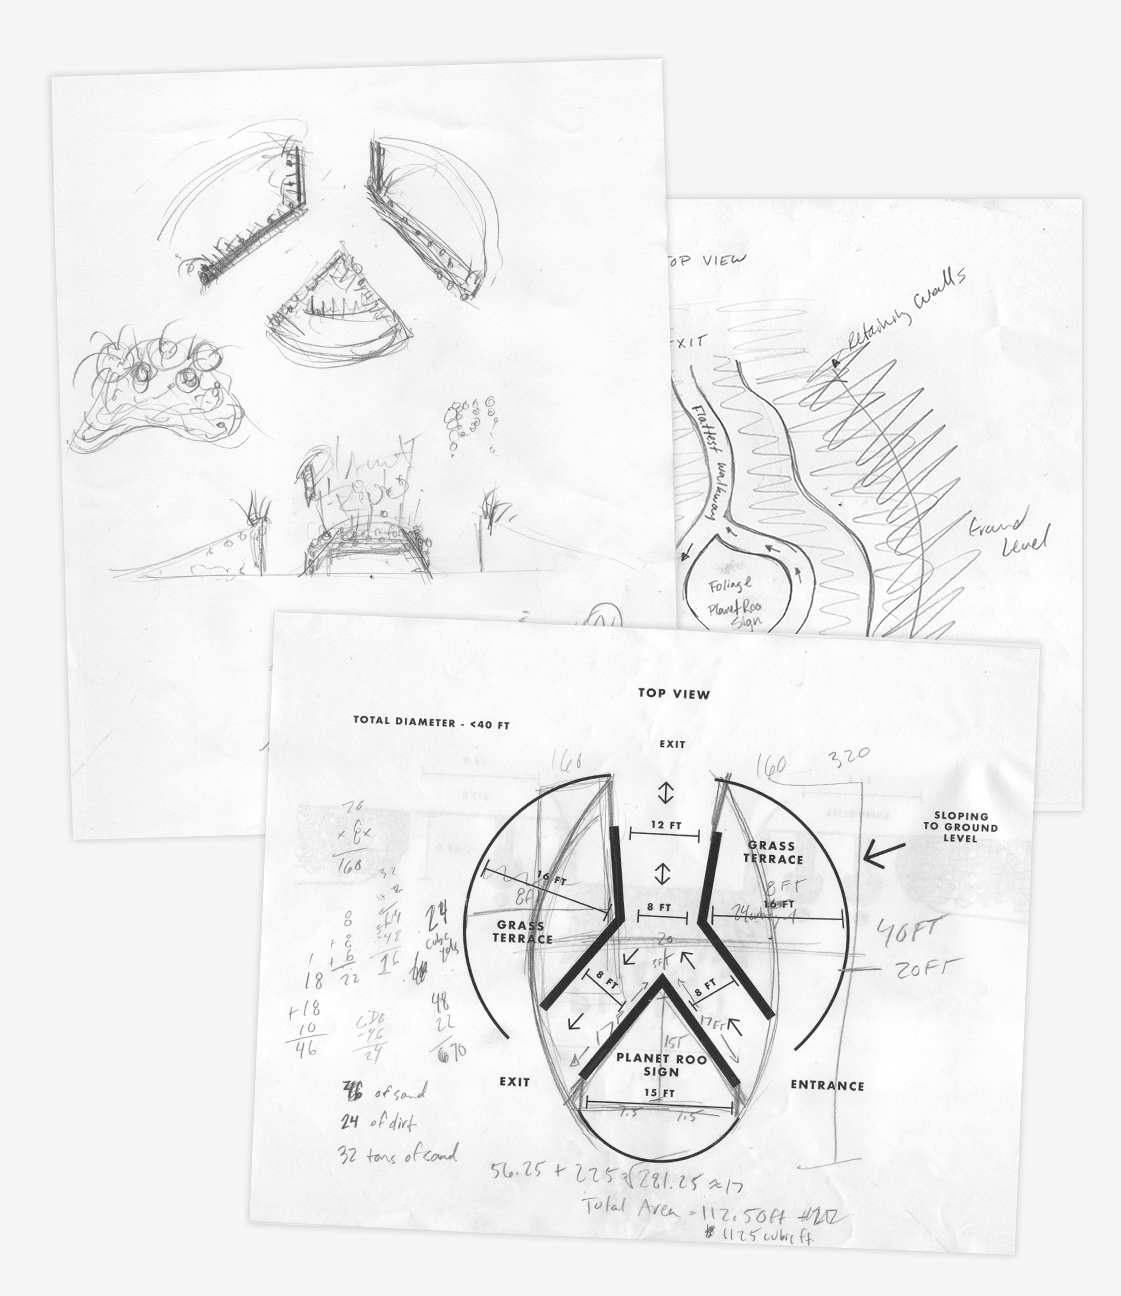 Photo of three sketches with layout and dimensions for the Planet Roo entryway at Bonnaroo Music and Arts Festival